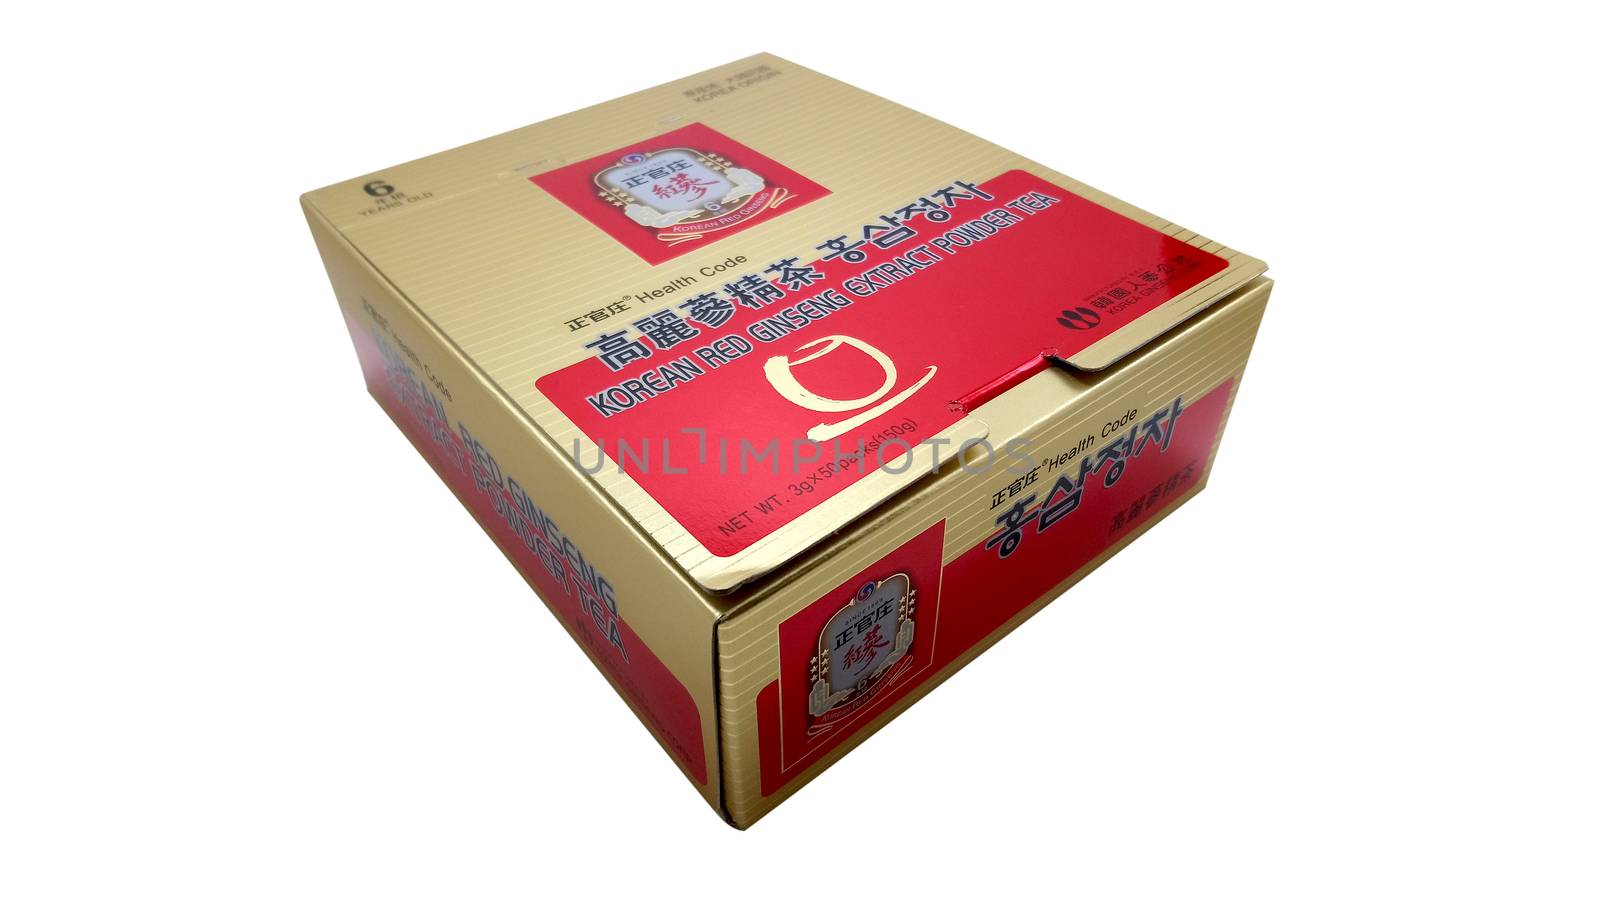 Korean red ginseng extract powder tea box in Manila, Philippines by imwaltersy